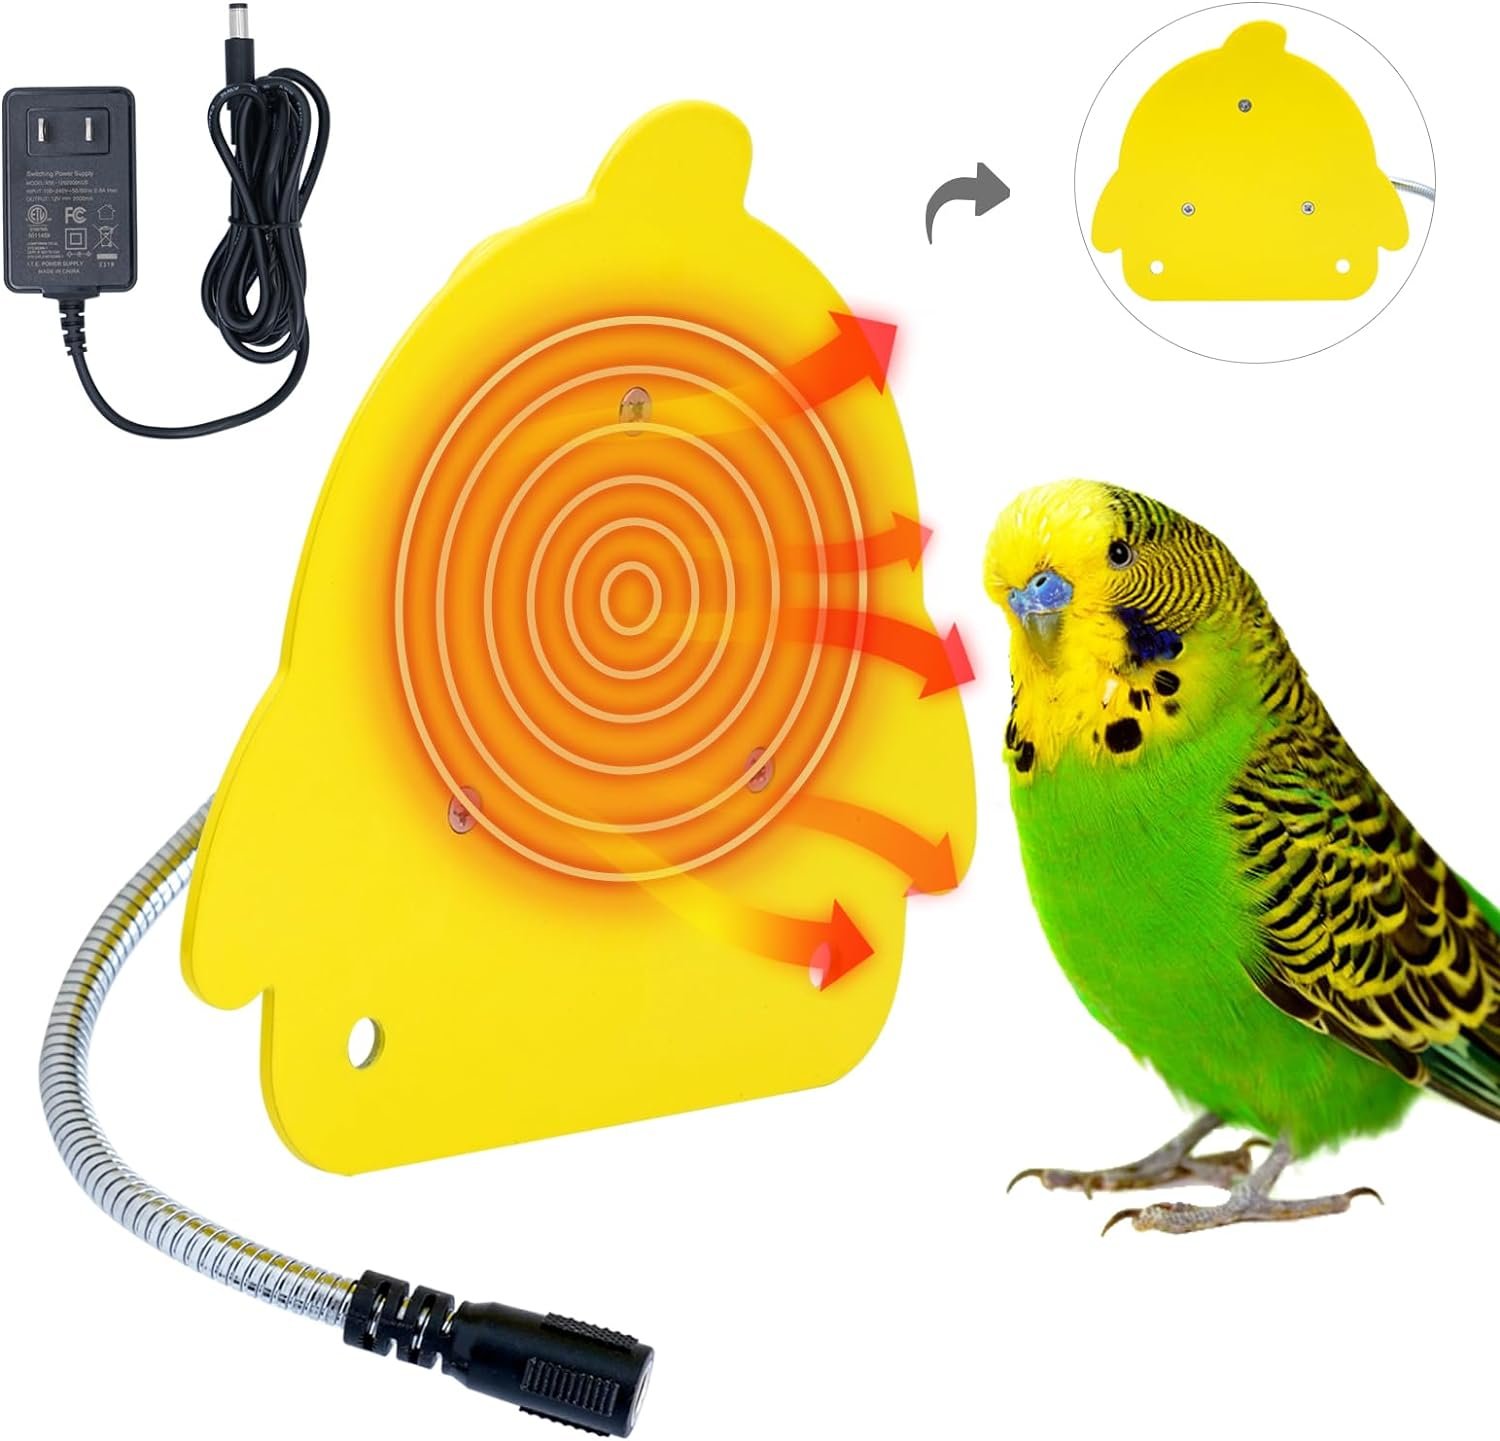 NAOEDEAH Bird Heater for Cage Bird Warmer Snuggle Up Heated Pad Bird Warmer for Parrot Parakeets Conure Bird Cage Heater, Warm Bird Perch Stand Birds Cage Accessories and Supplies (Yellow)